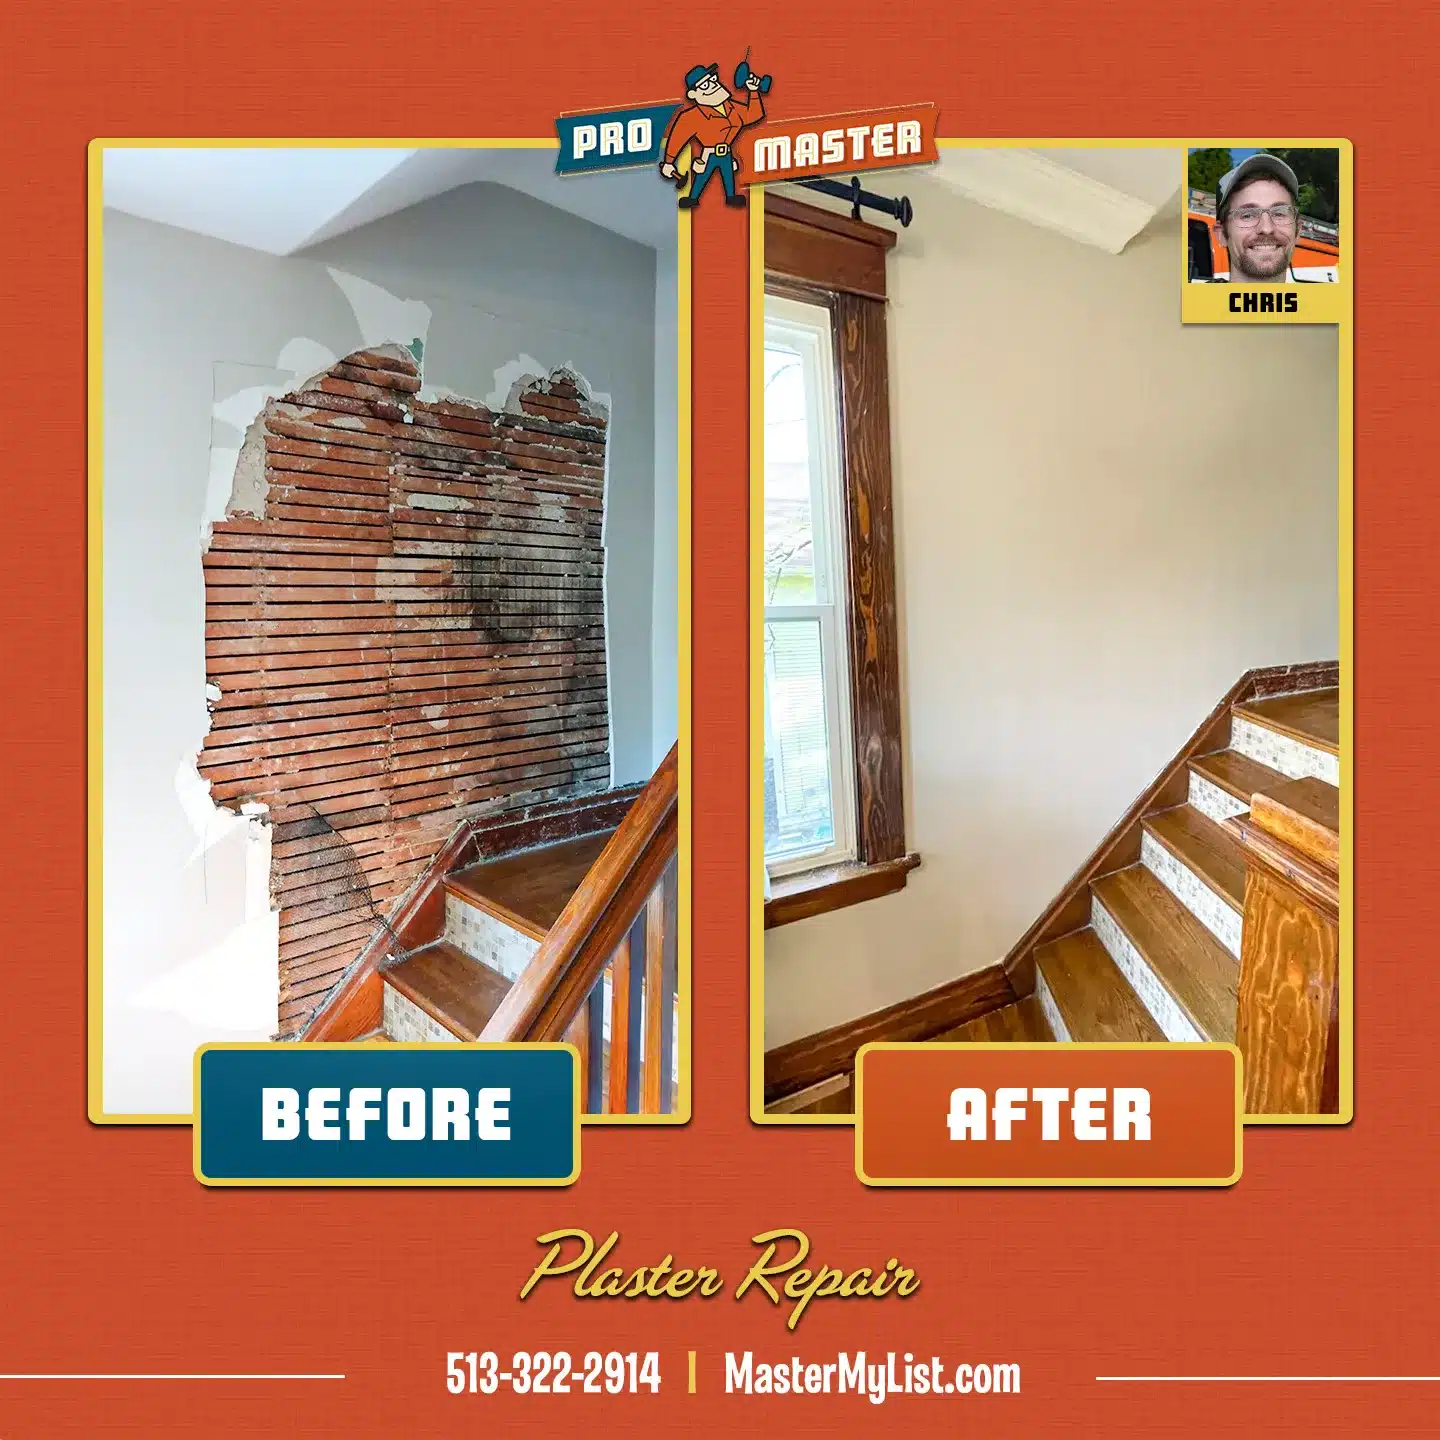 Before and after image of plaster repair completed by ProMaster craftsmen in Cincinnati, OH.